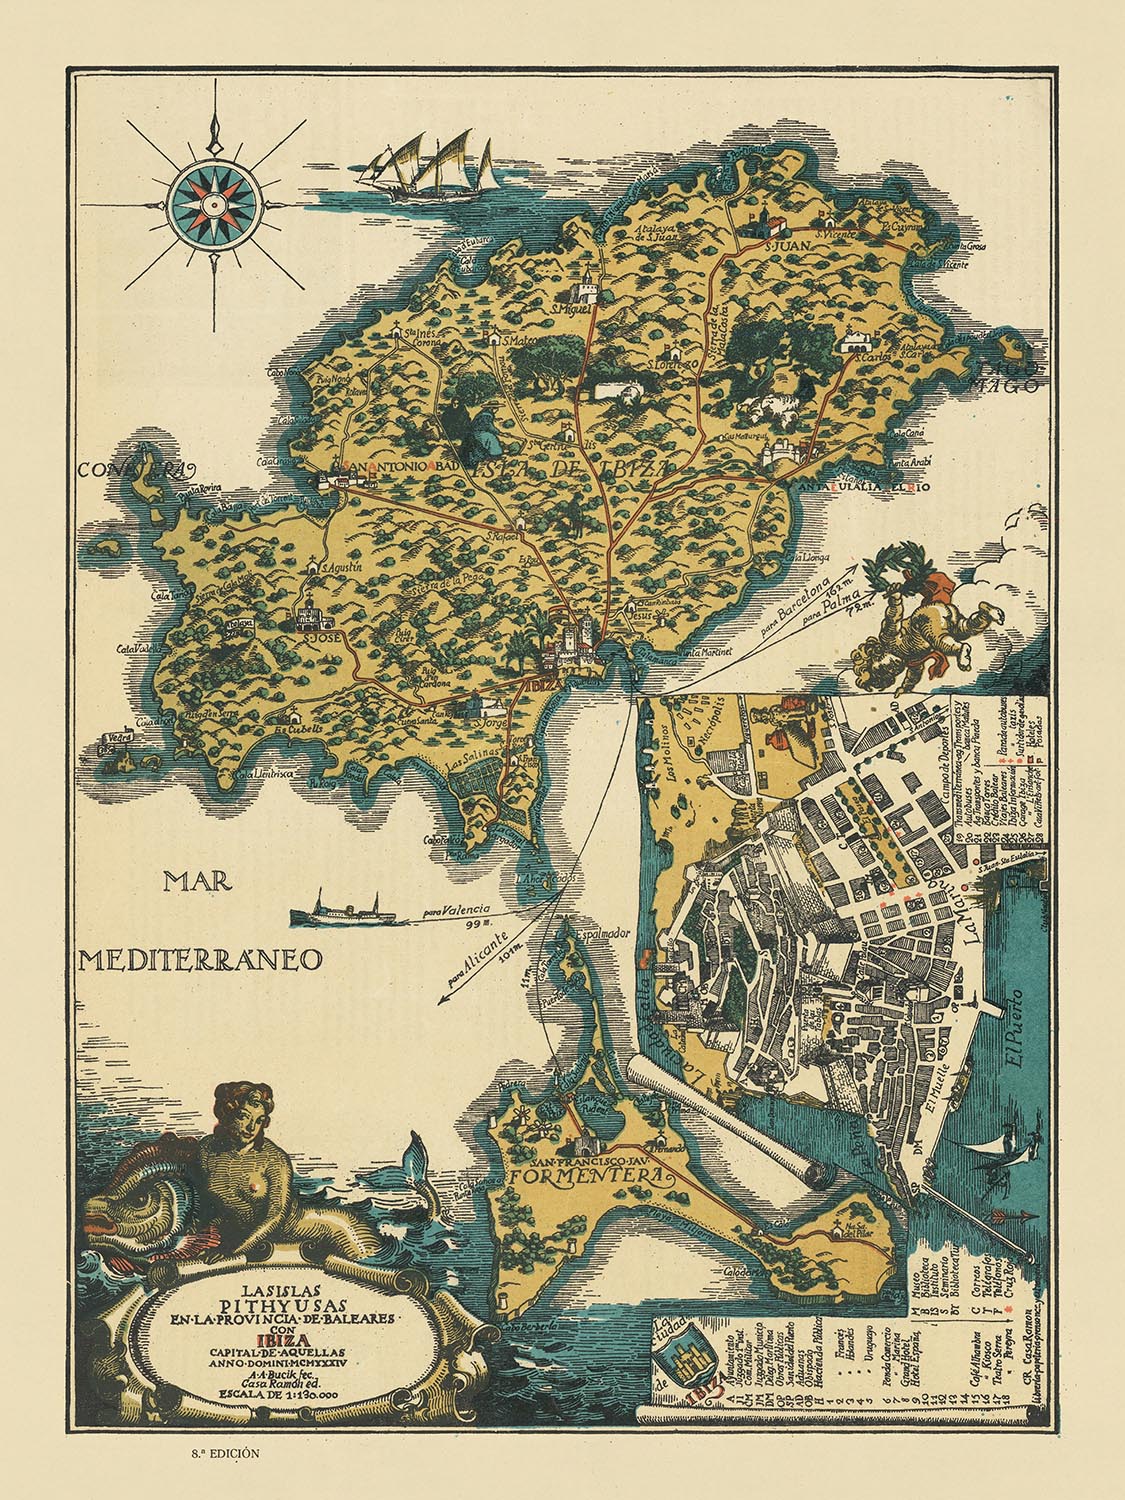 Old Map of Ibiza and Formentera, 1934: Pictorial Chart of Tourist Attractions, Landmarks, Mediterranean